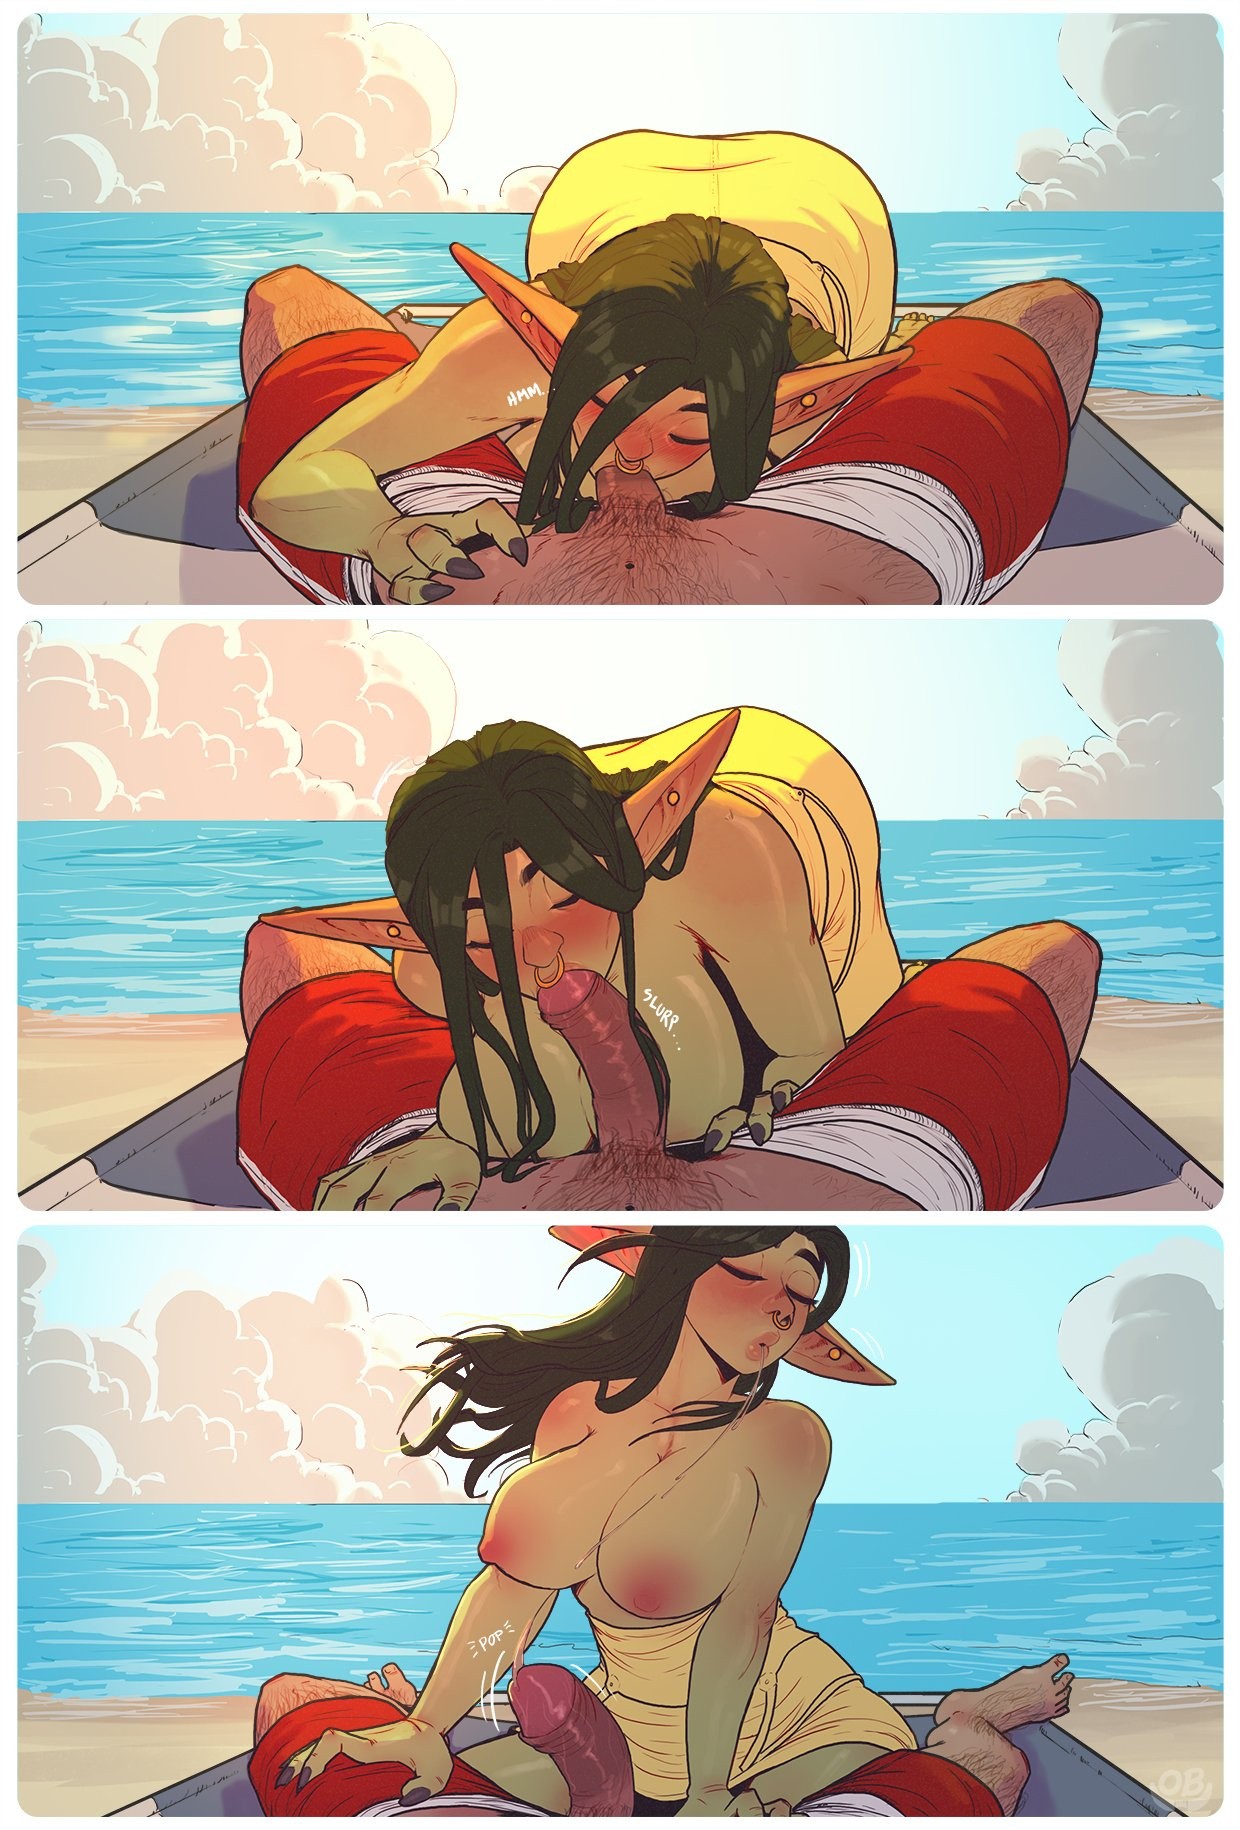 Beach Day in Xhorhas porn comic picture 17